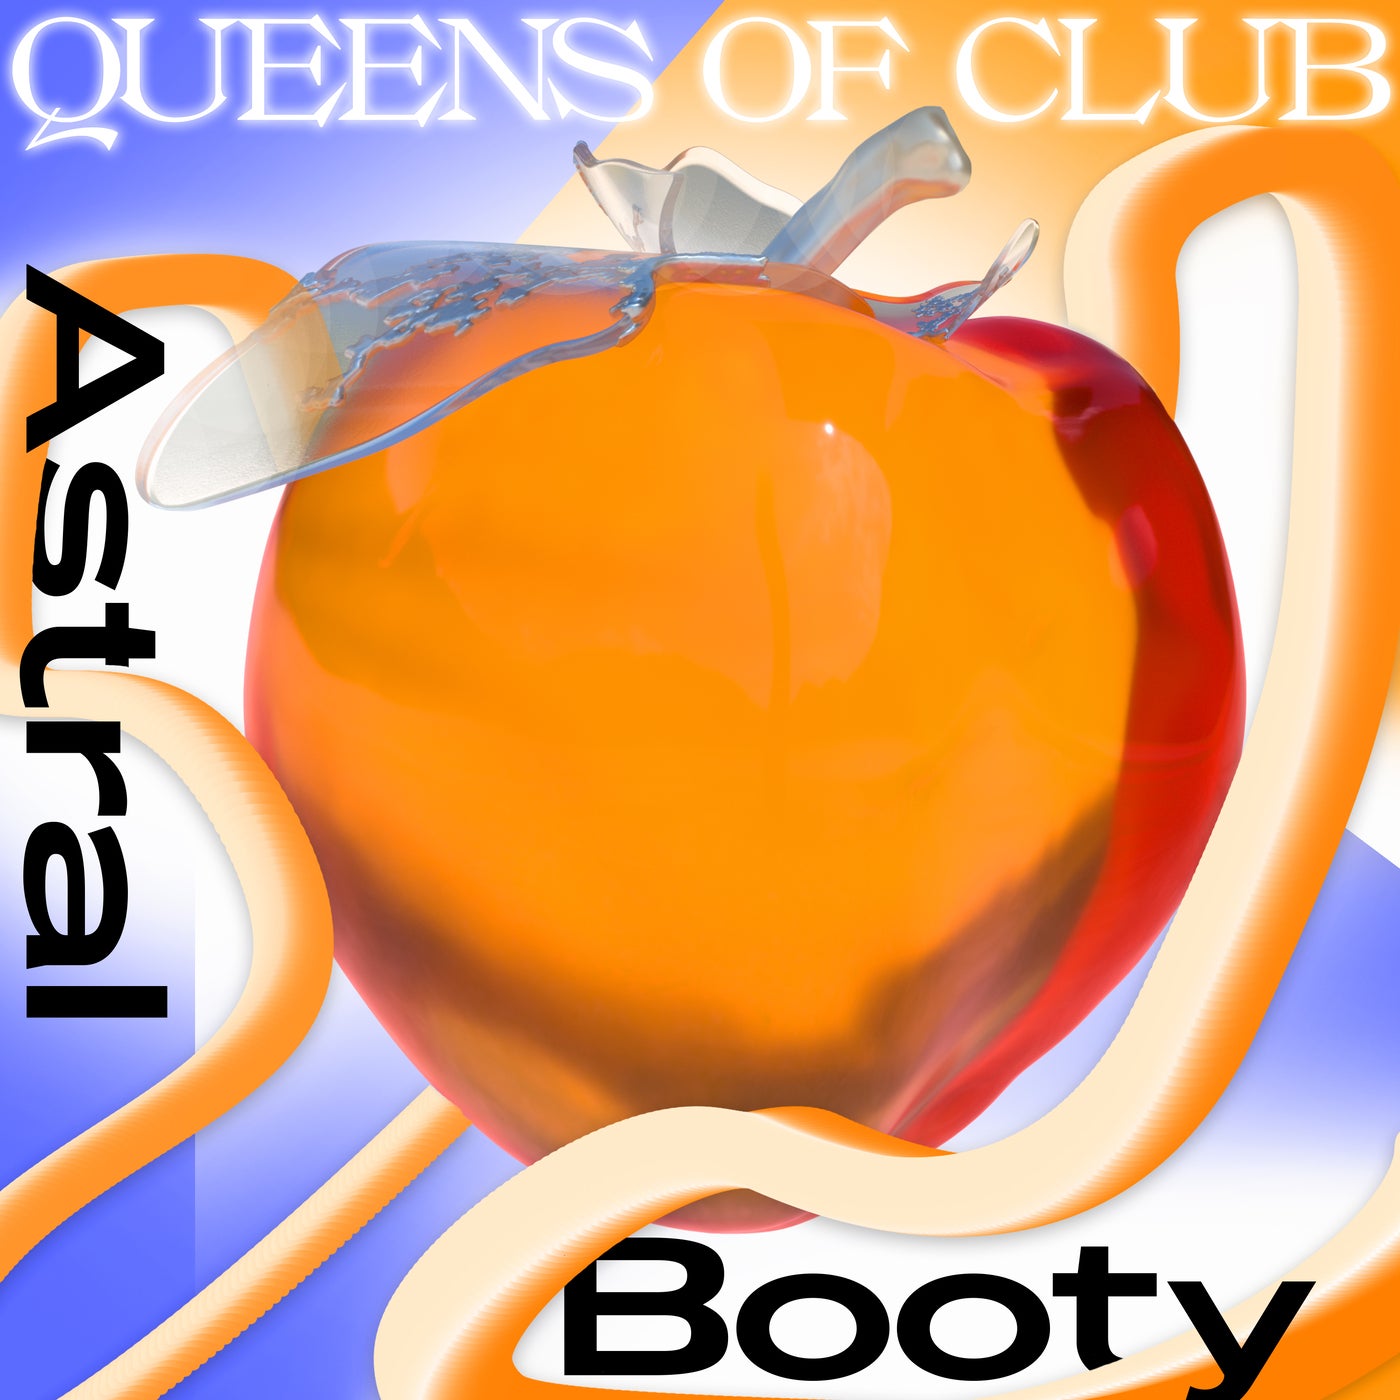 Queens of Club: Astral Booty